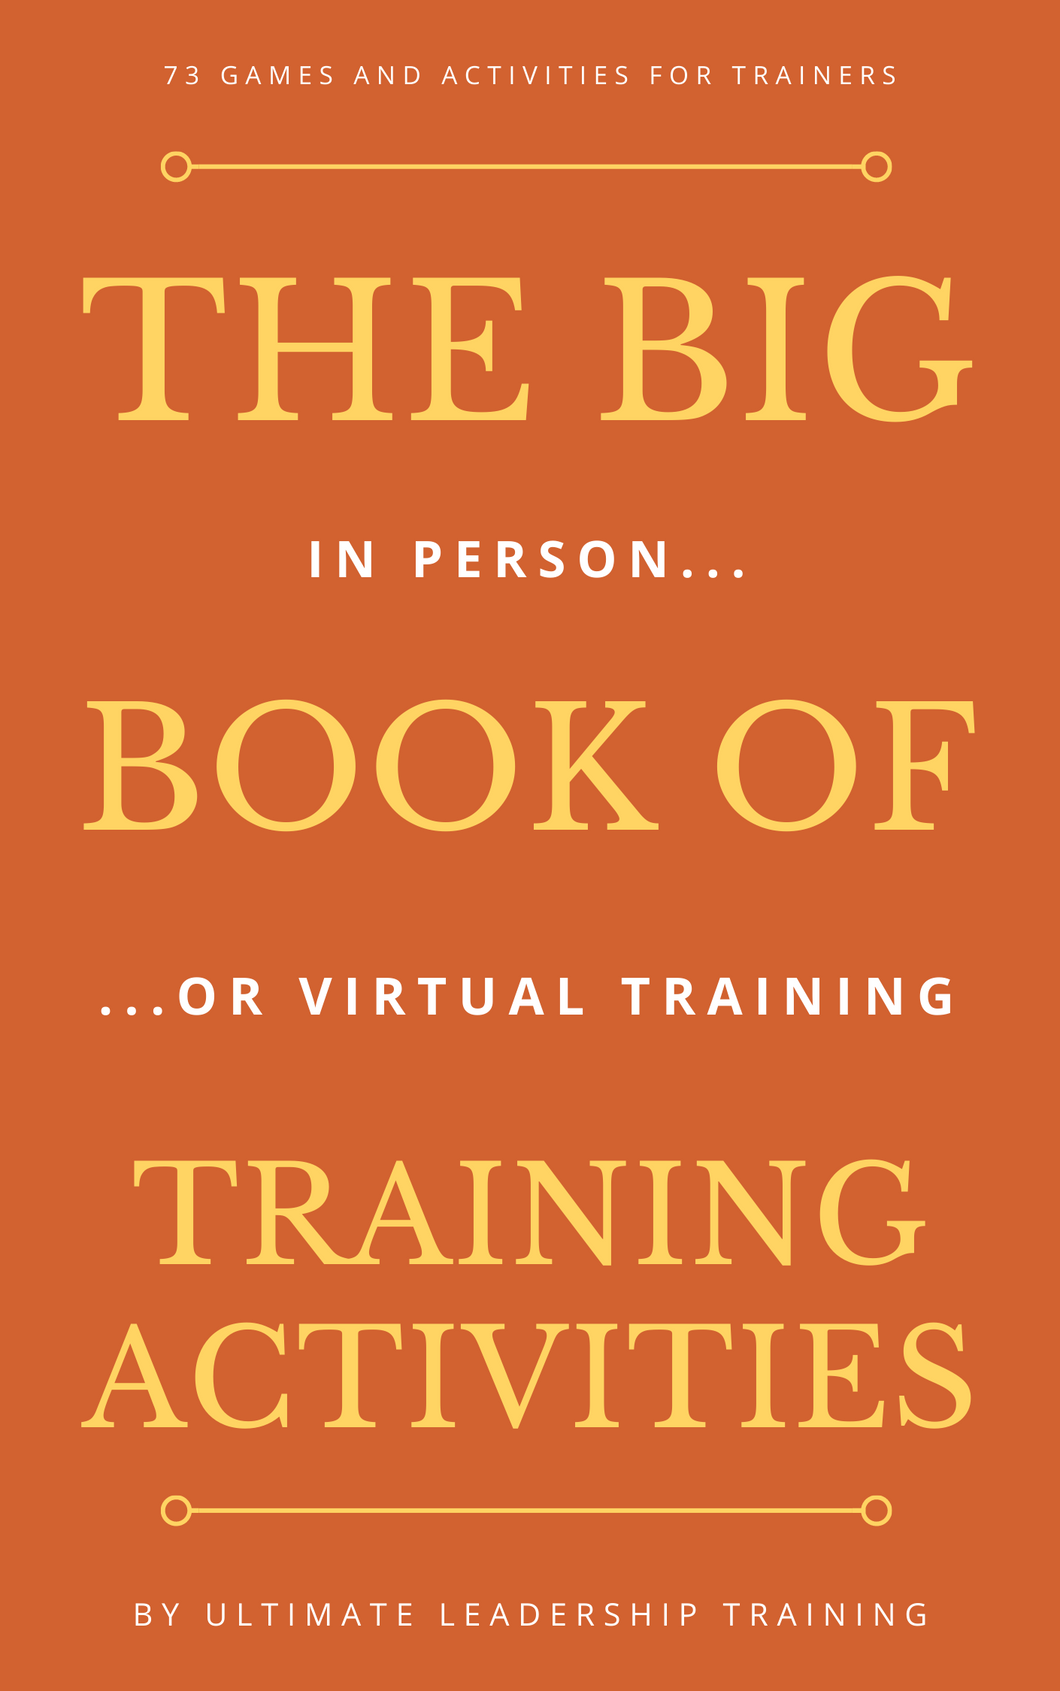 Big book of training games and team building activity for in person and virtual training courses and team building activities